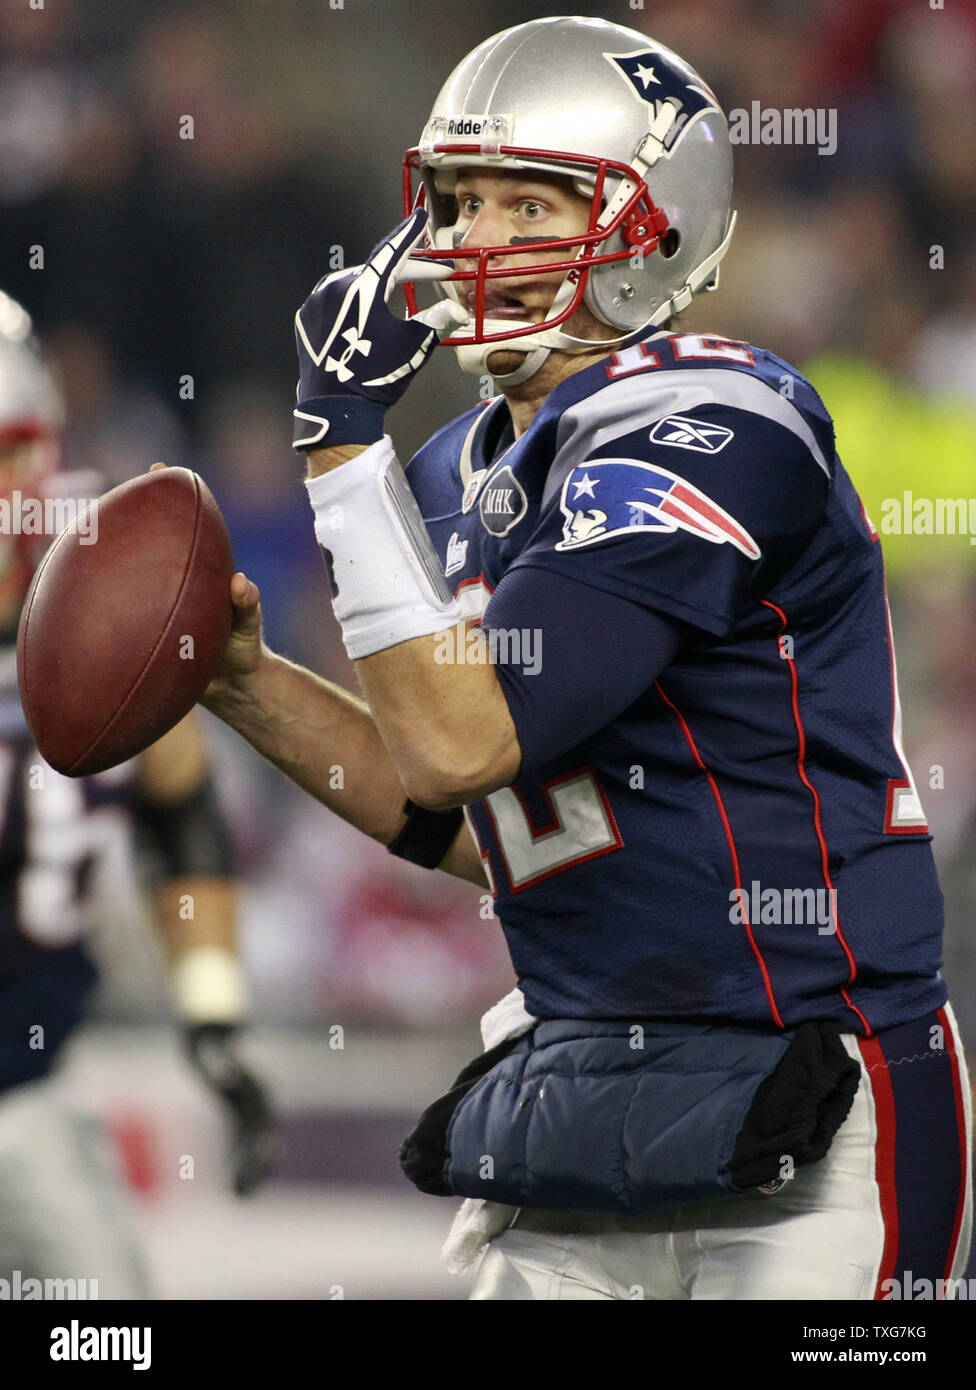 New England Patriots quarterback Tom Brady rolls out for a pass in the fourth quarter against the Kansas City Chiefs at Gillette Stadium in Foxboro, Massachusetts on November 21, 2011.  The Patriots defeated the Chiefs 34-3.   UPI/Matthew Healey Stock Photo